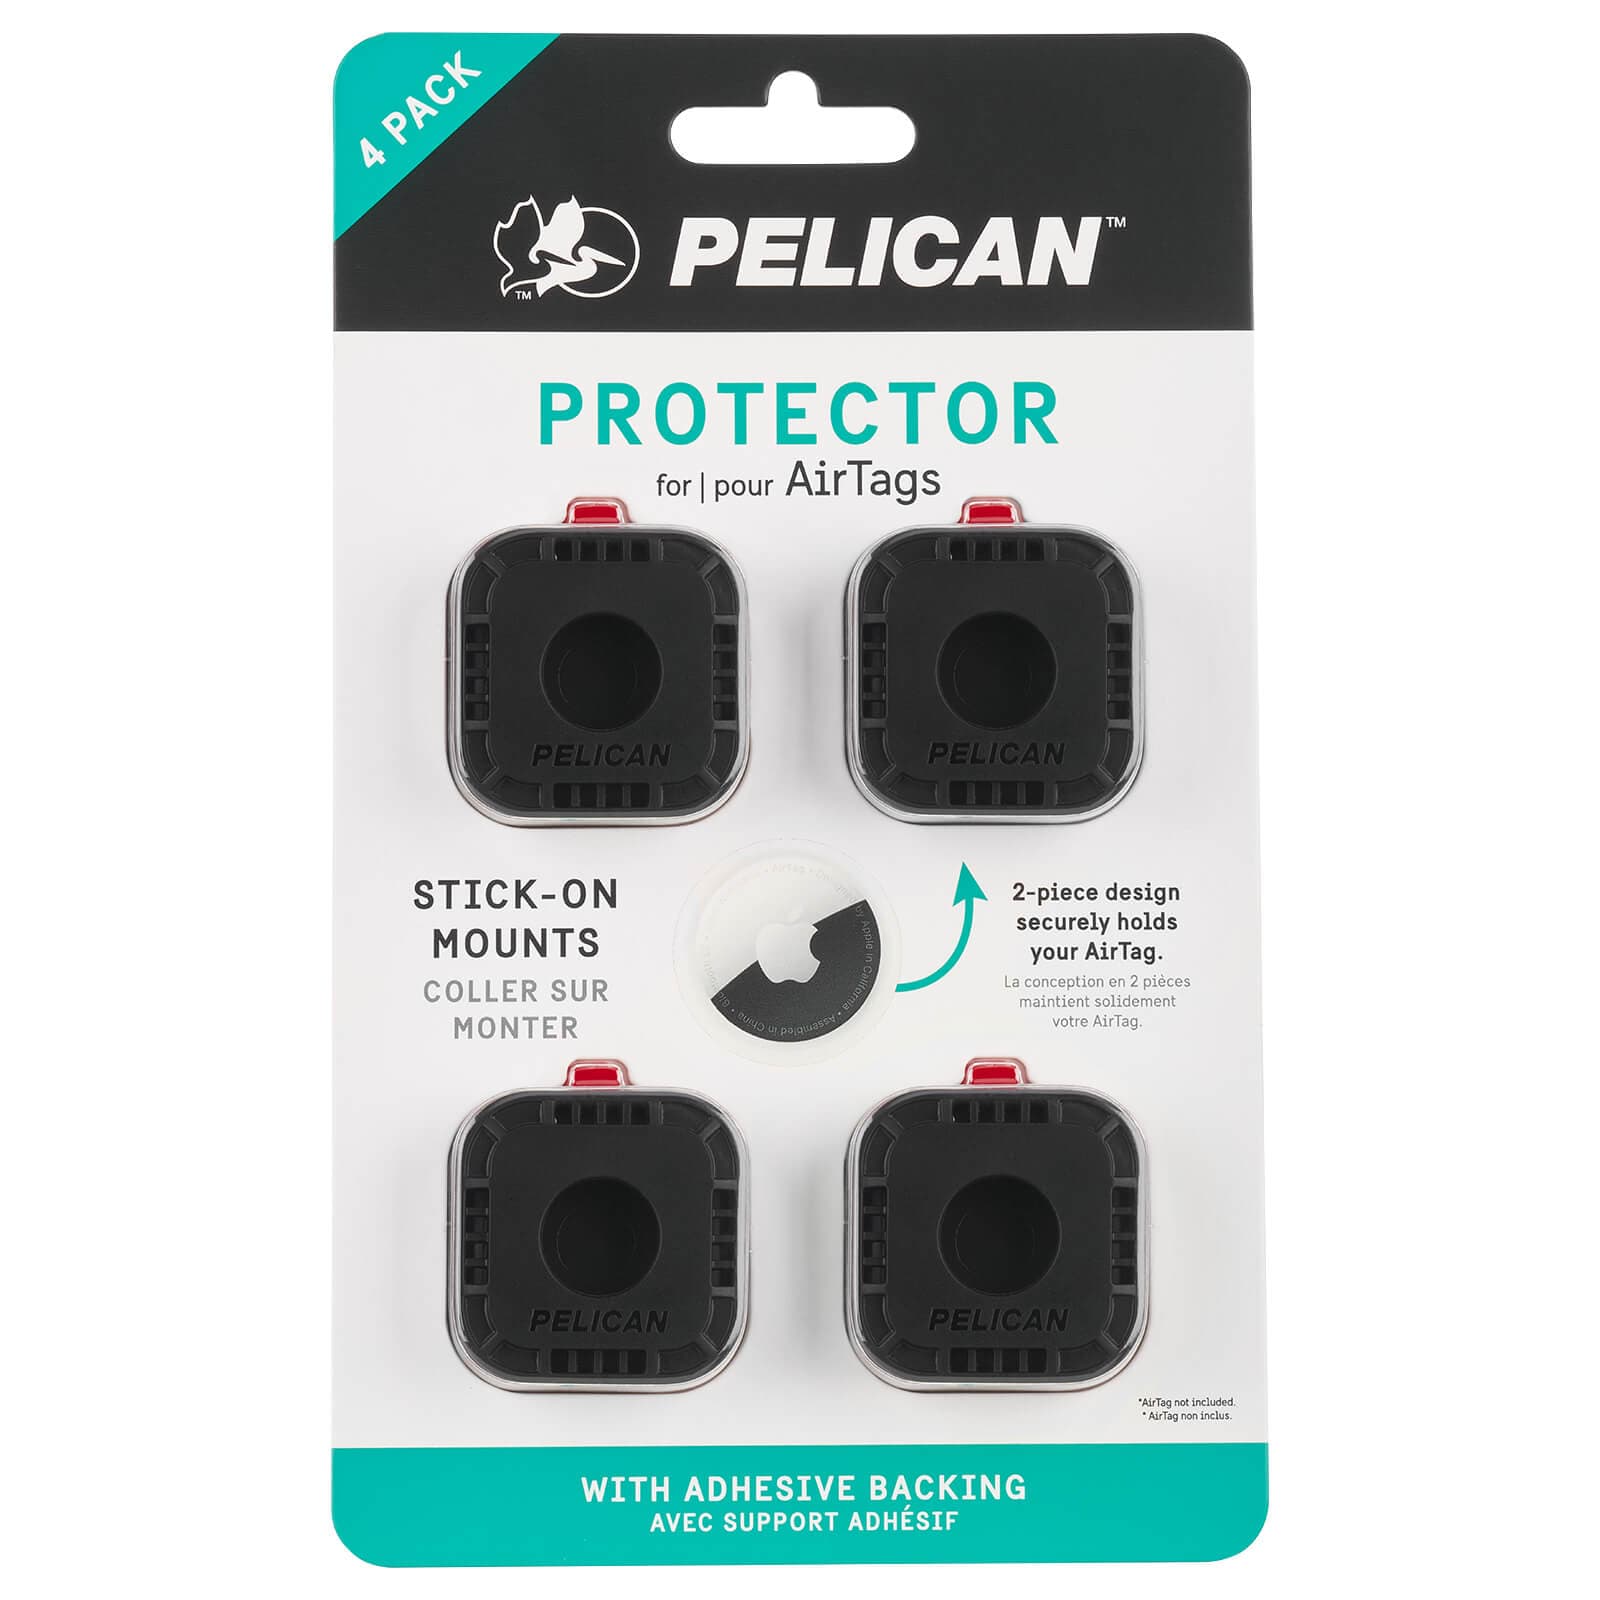 Pelican Protector AirTag Sticker Mount 4 Pack (Black) 